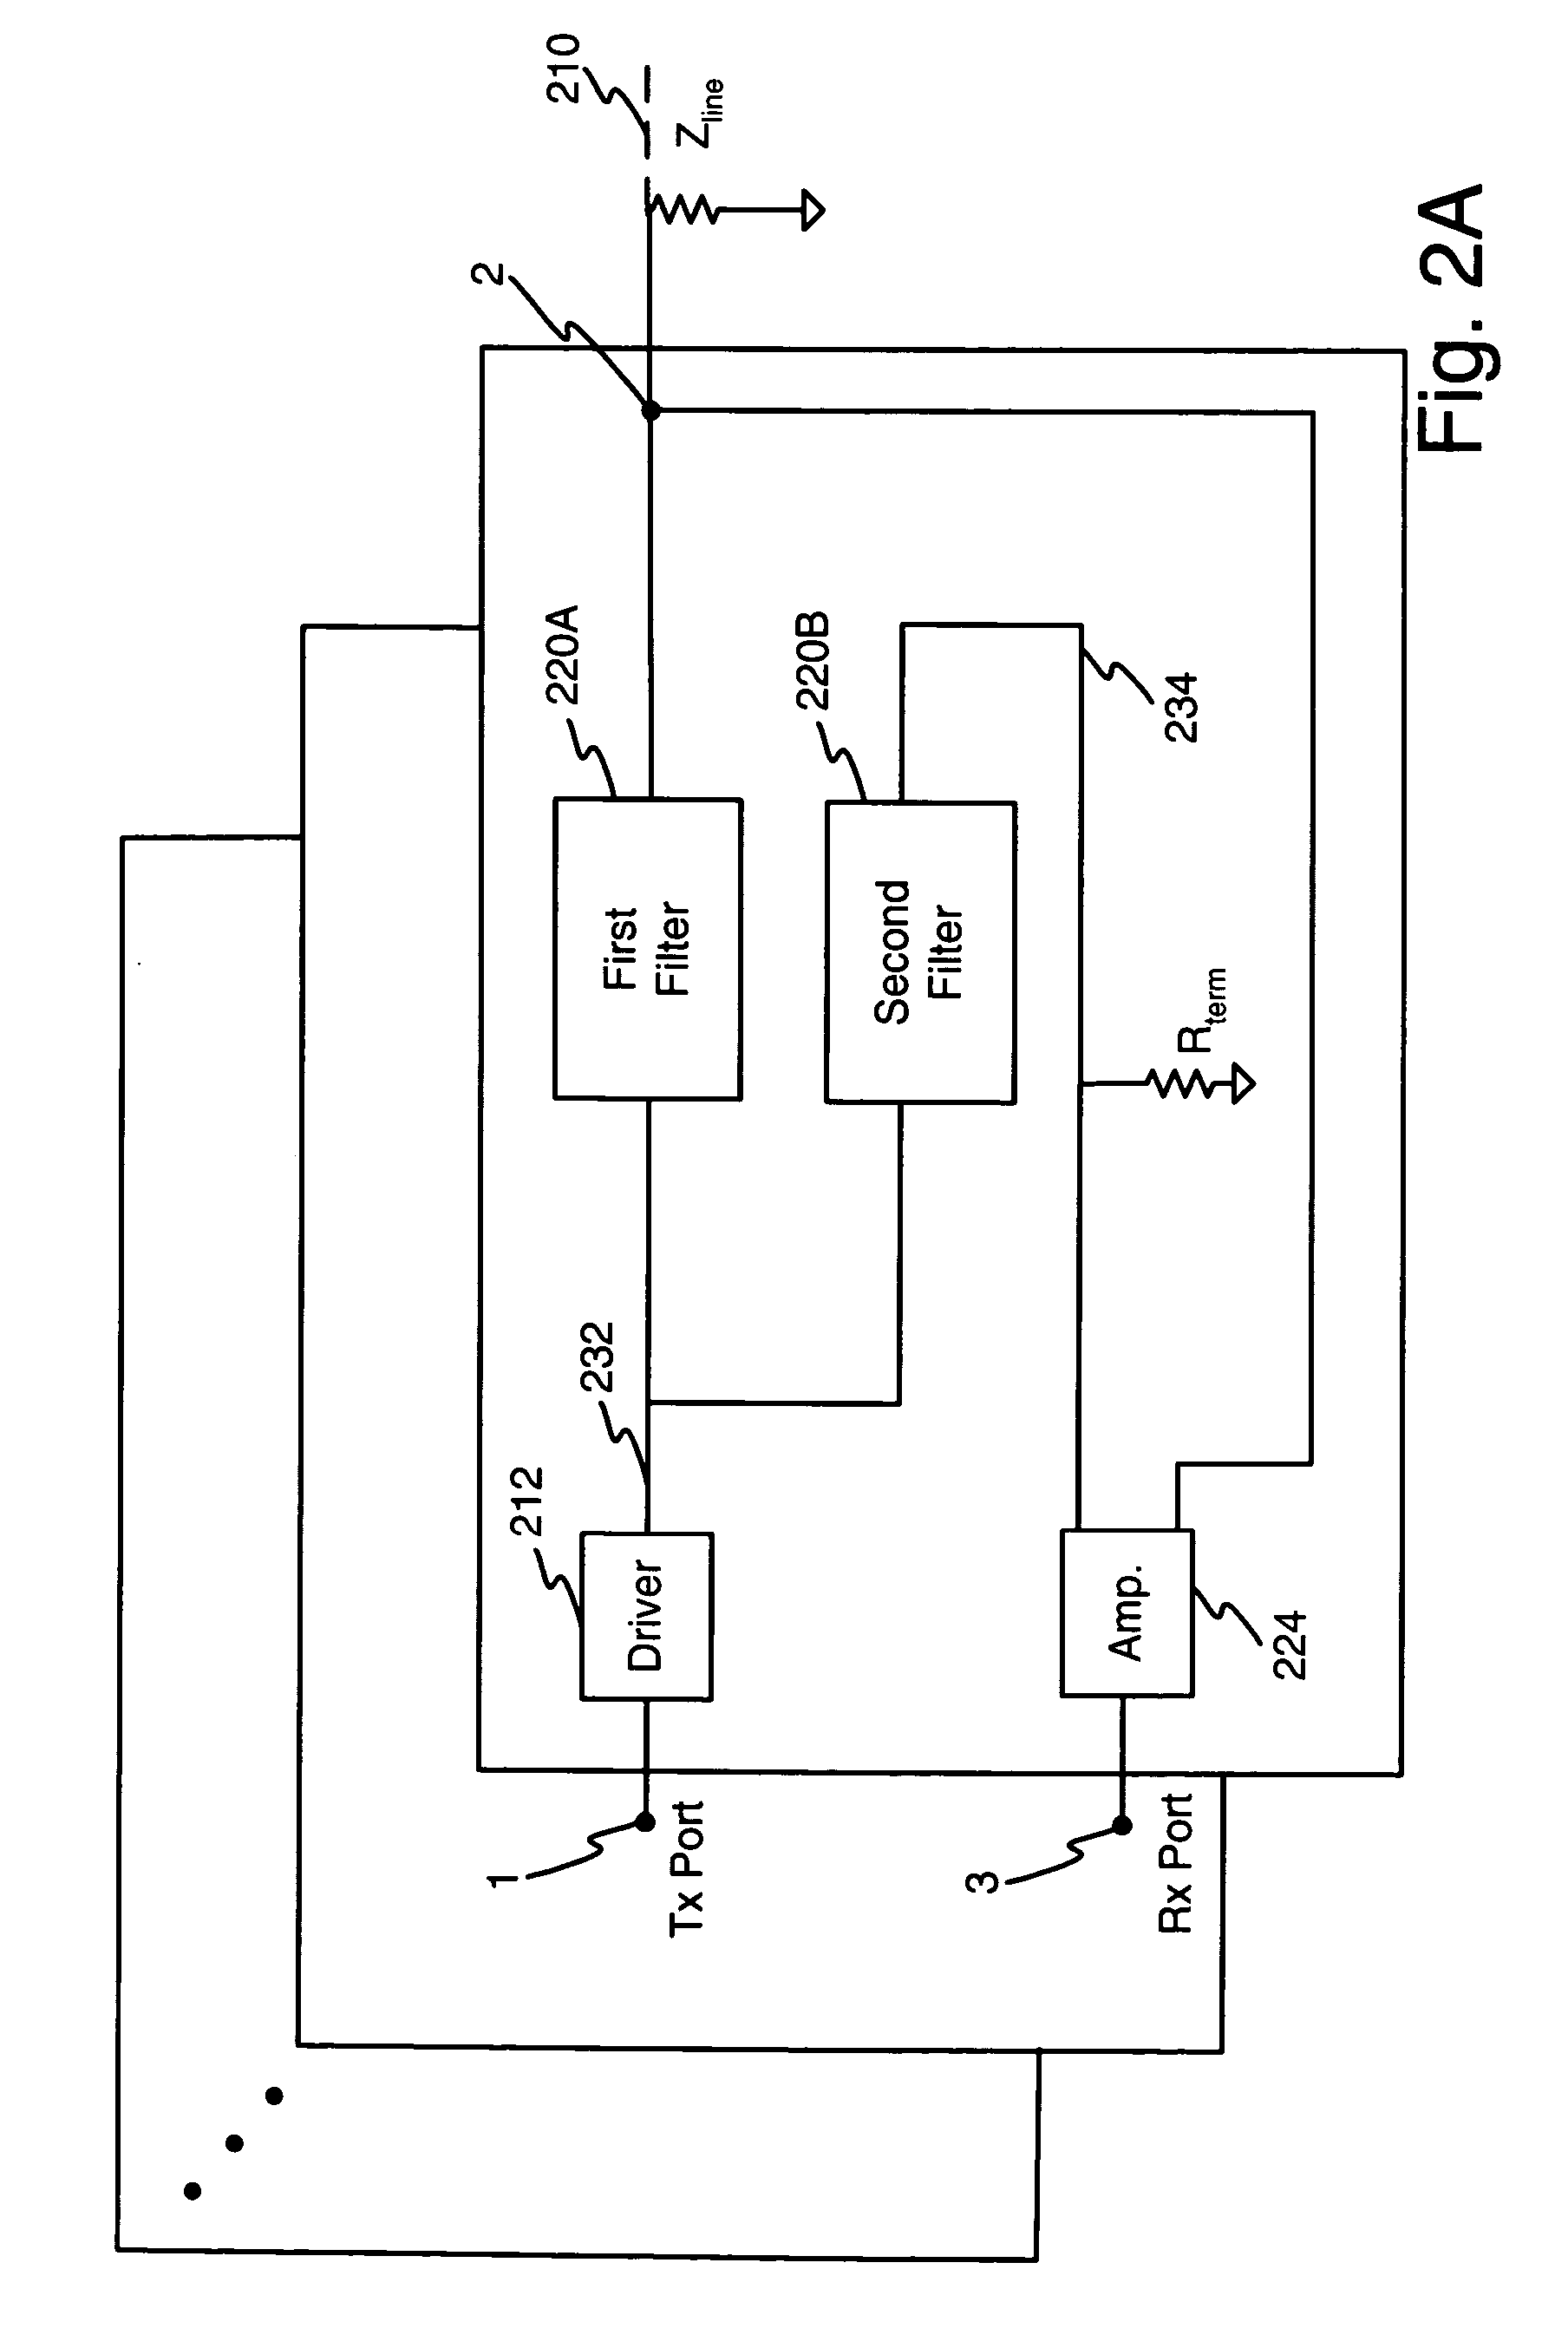 Isolation of transmit and receive signals